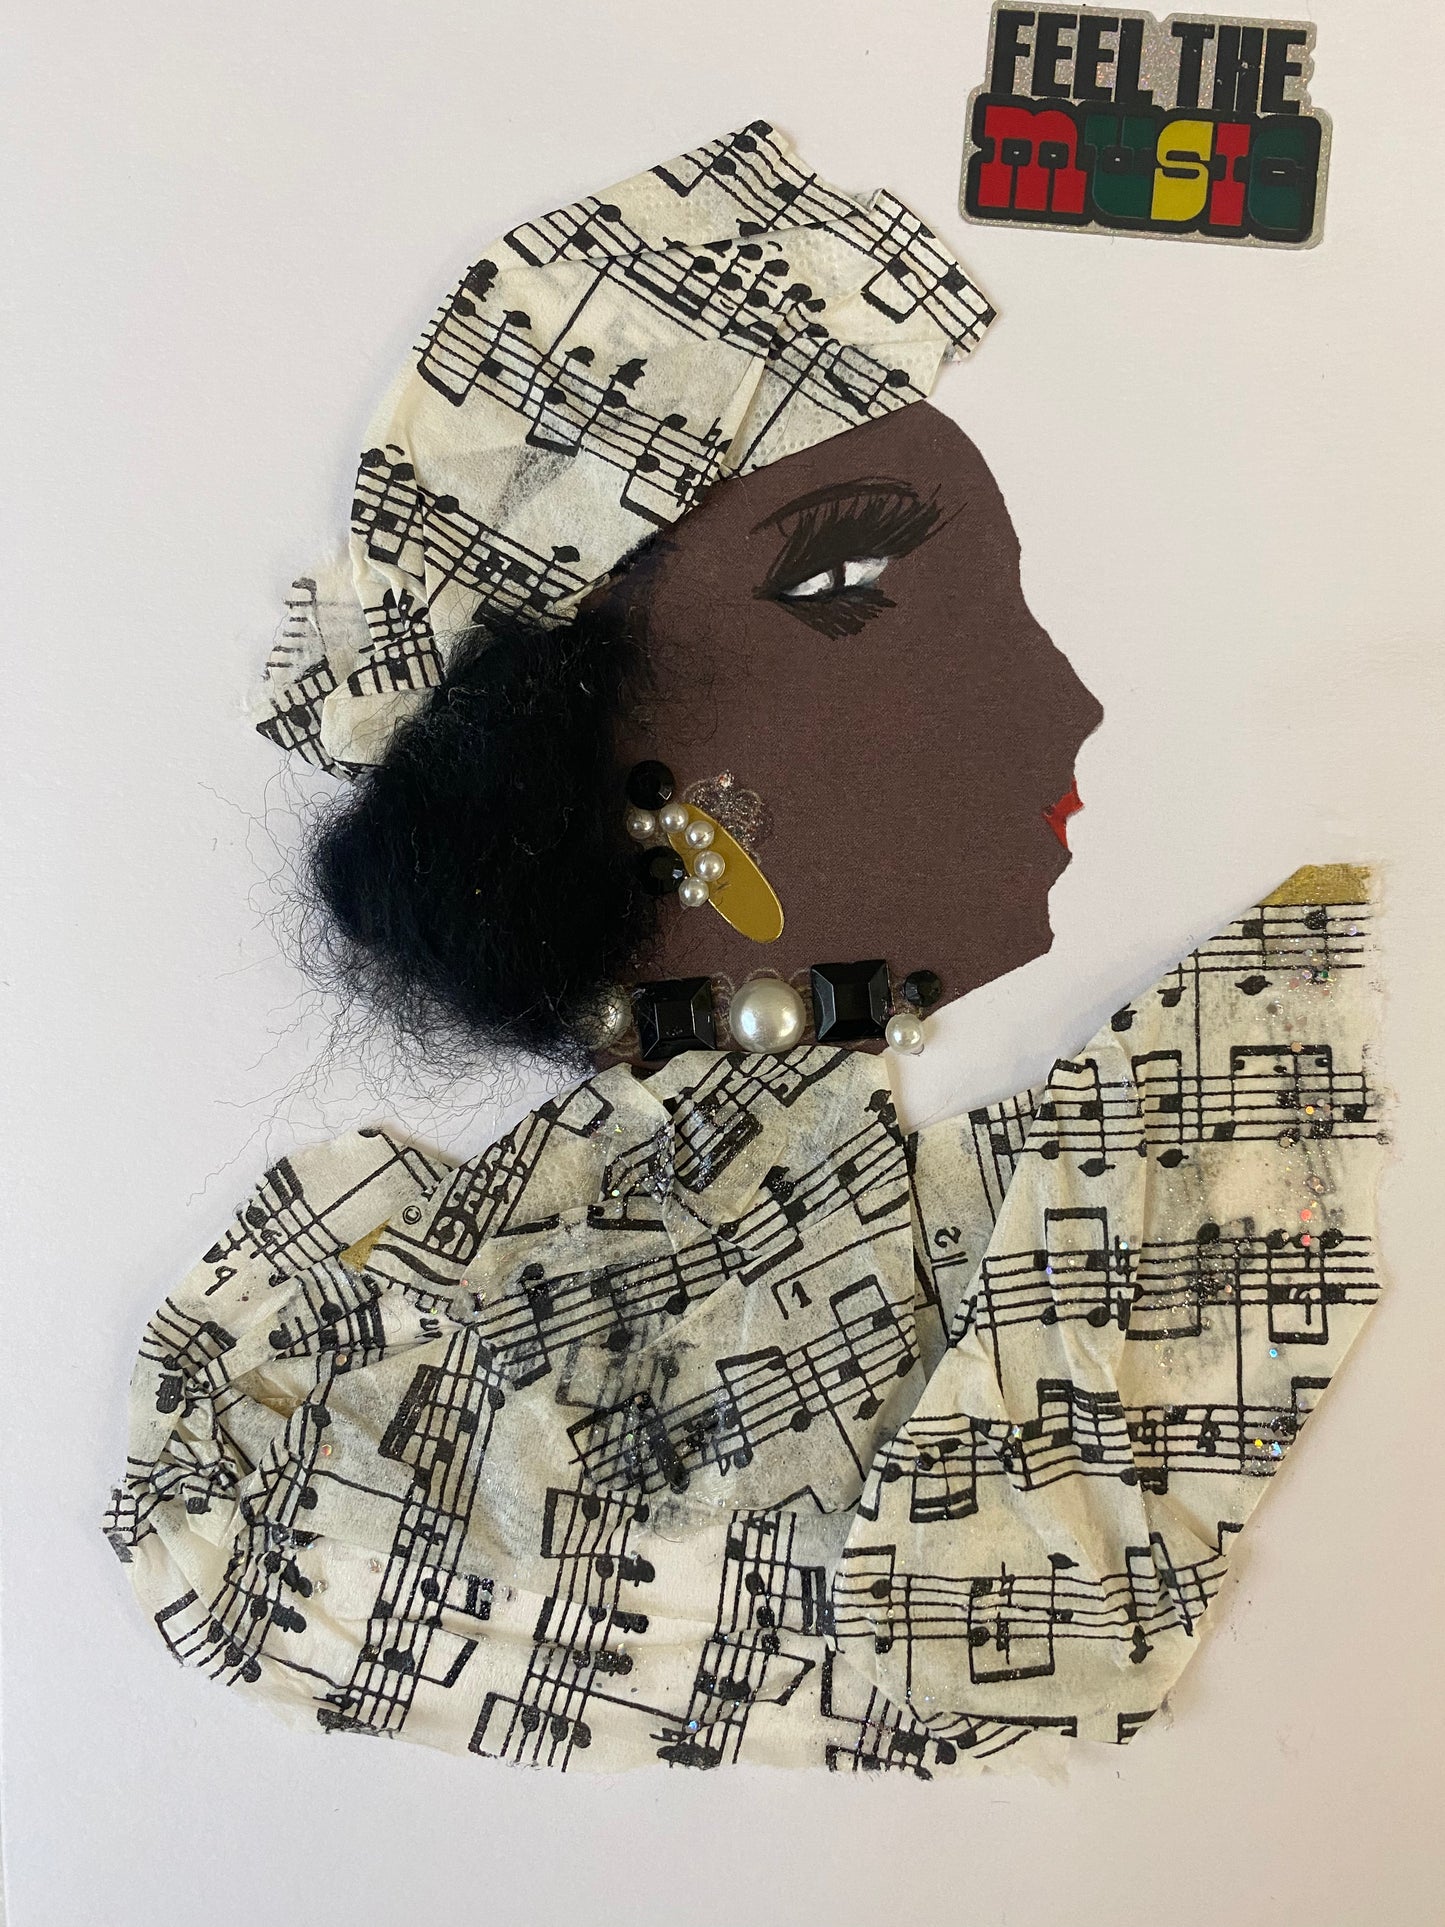 The Diamond Daniela card features a dapper figure attired in a harmonious matching ensemble, including an intricate head wrap and chic blouse adorned with music notes, capped with glamorous black and pearl jewellery. In the top corner, it reads: "Feel the Music."